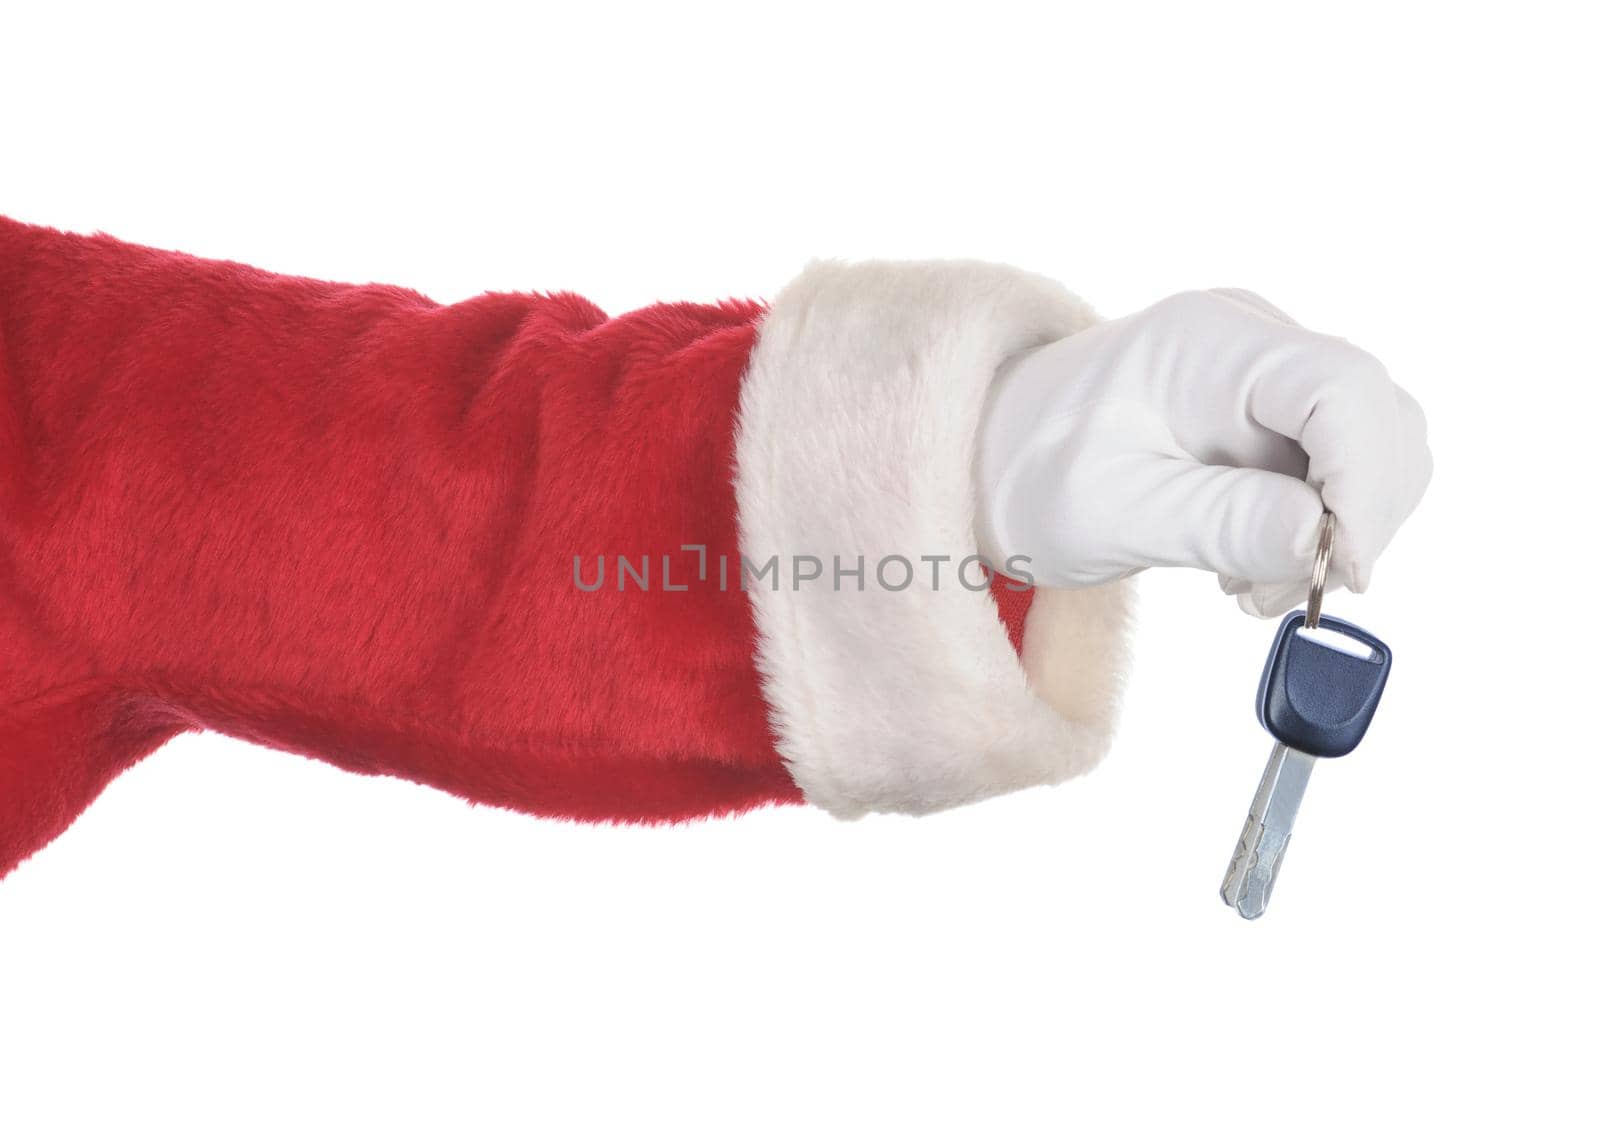 Santa Claus holding a set of car keys isolated over white. Hand and arm only in horizontal format.